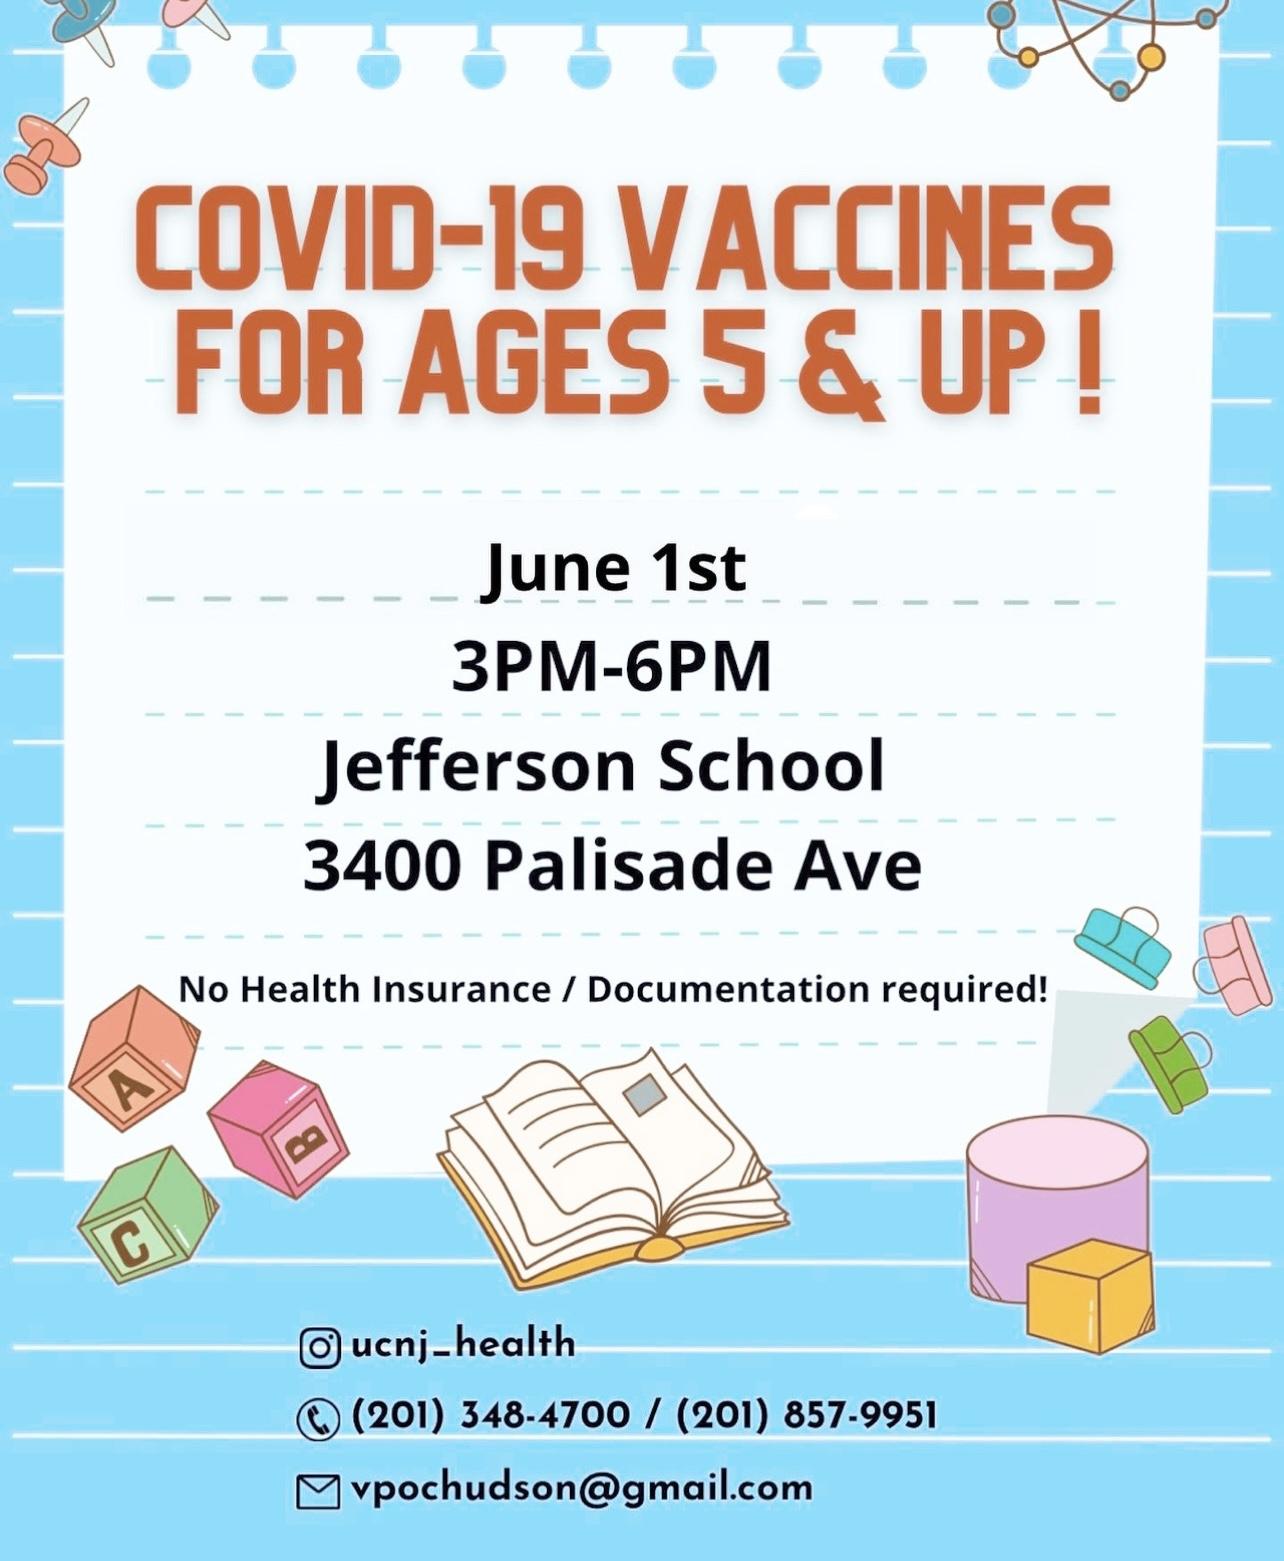 COVID-19 Vaccines For Ages 5 & Up Are Now Available-English Flyer